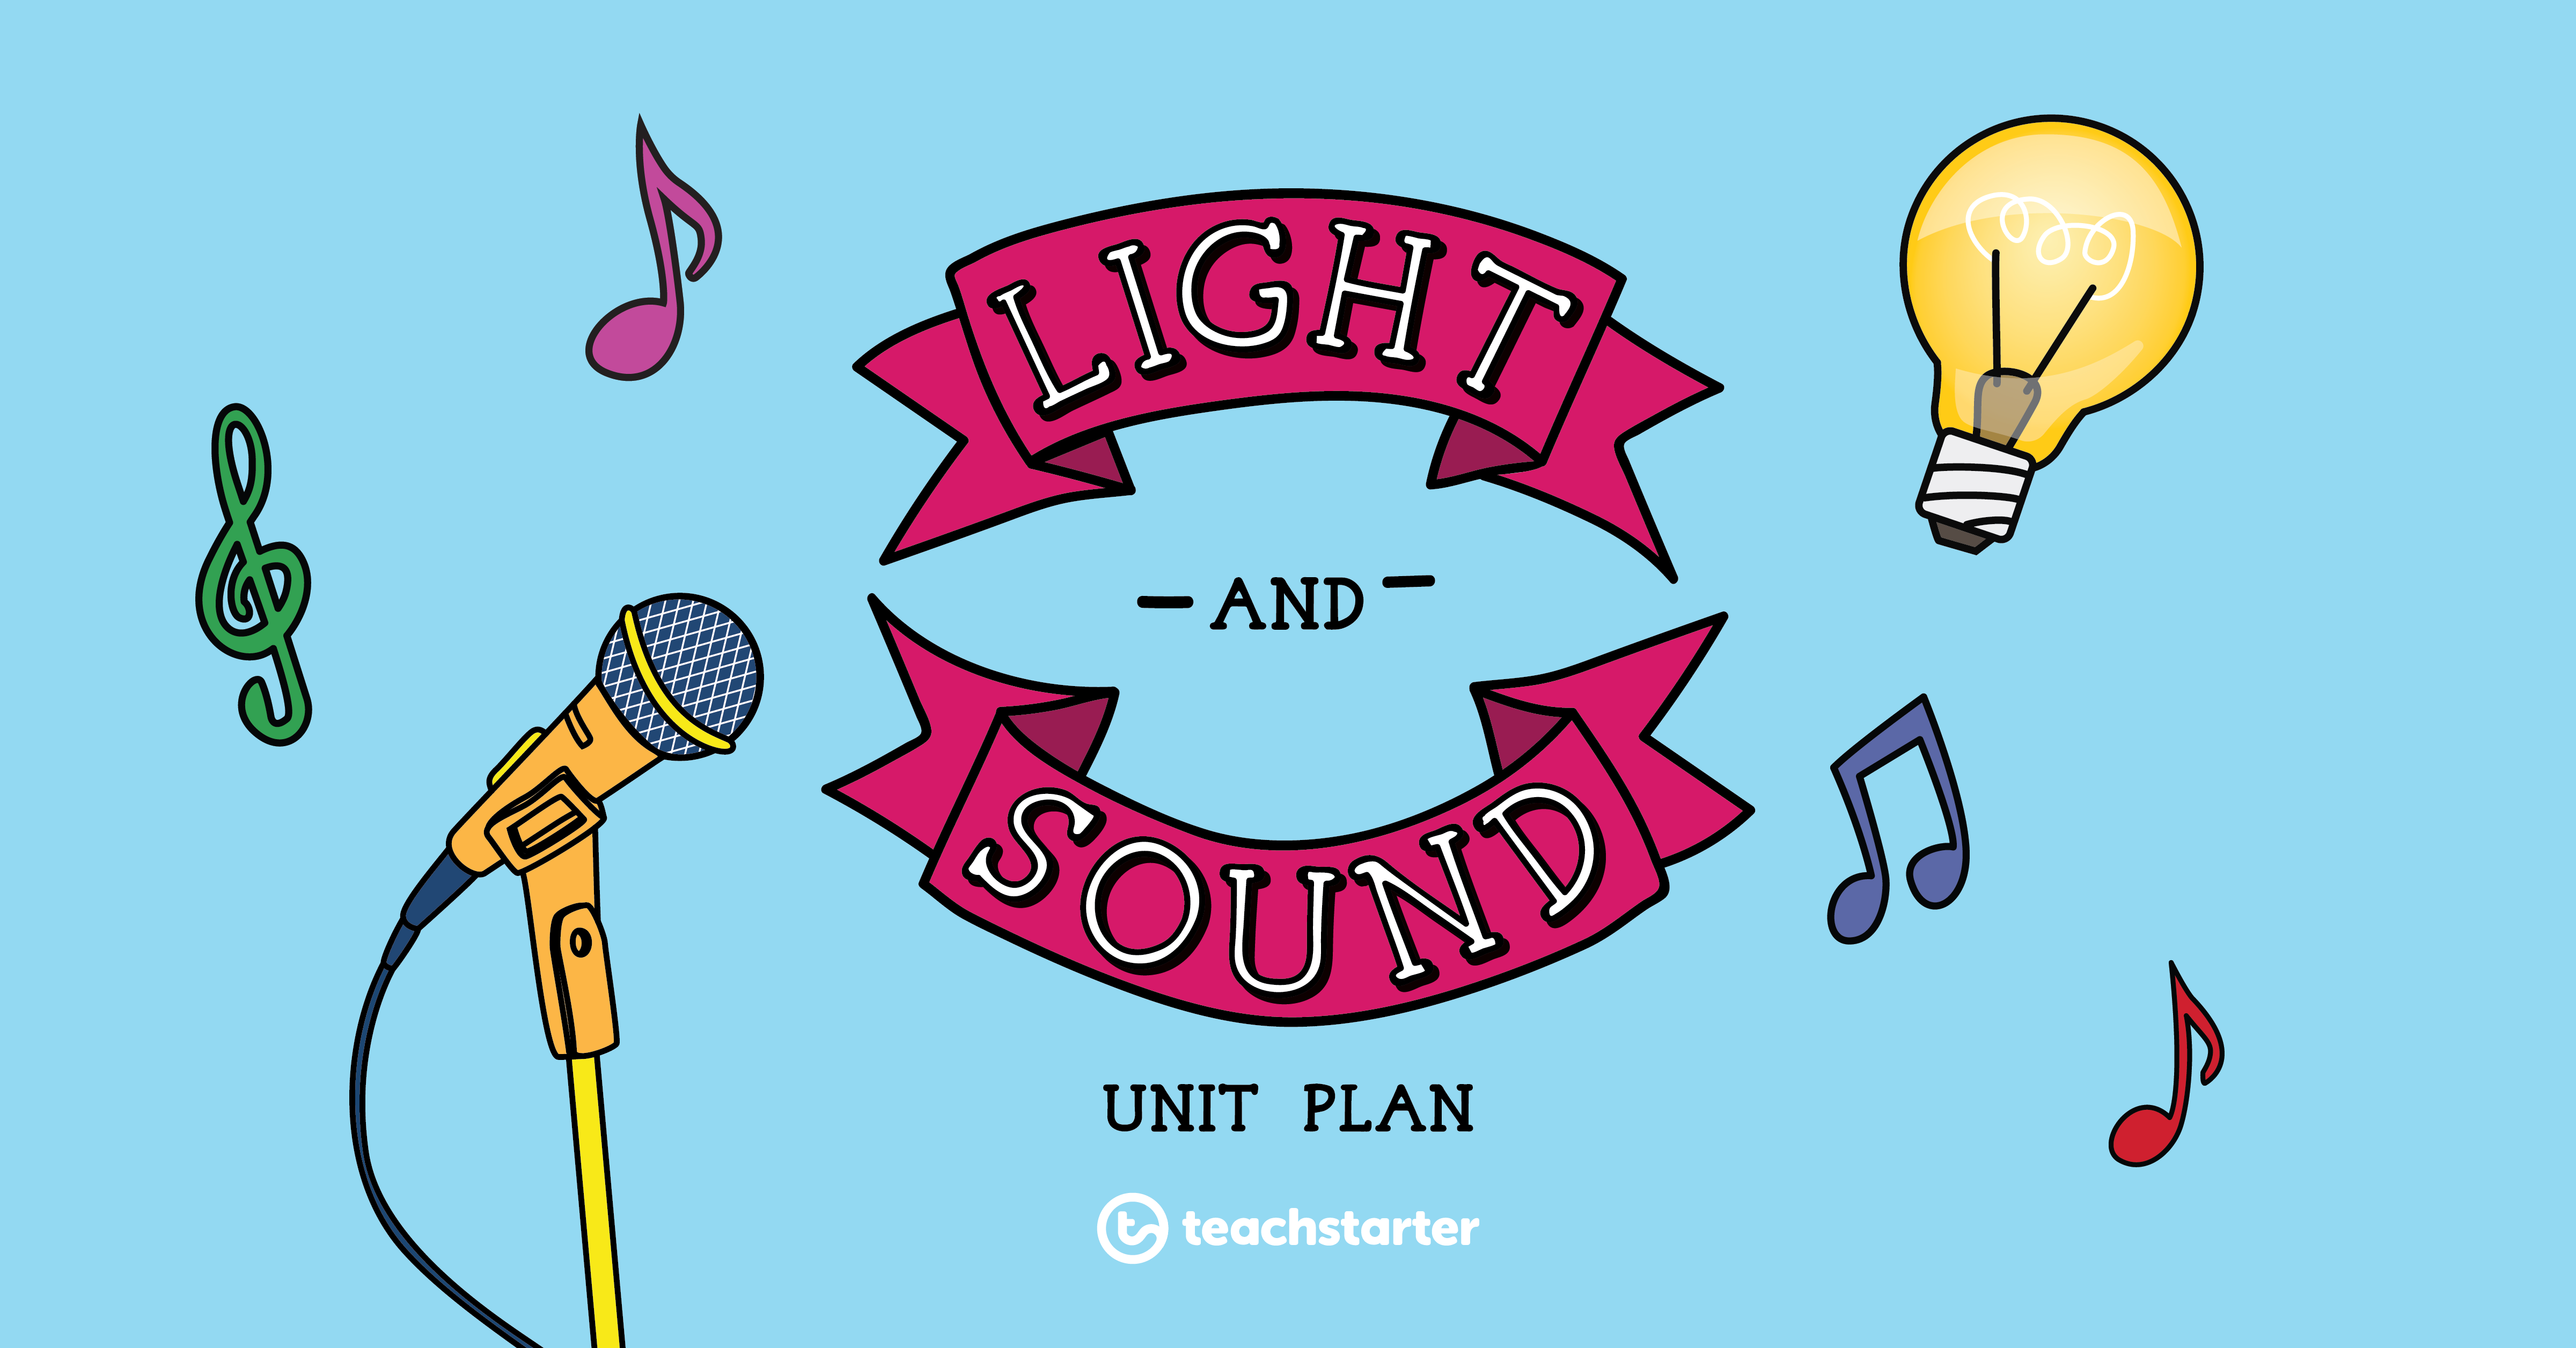 Light and sound science activities for the classroom